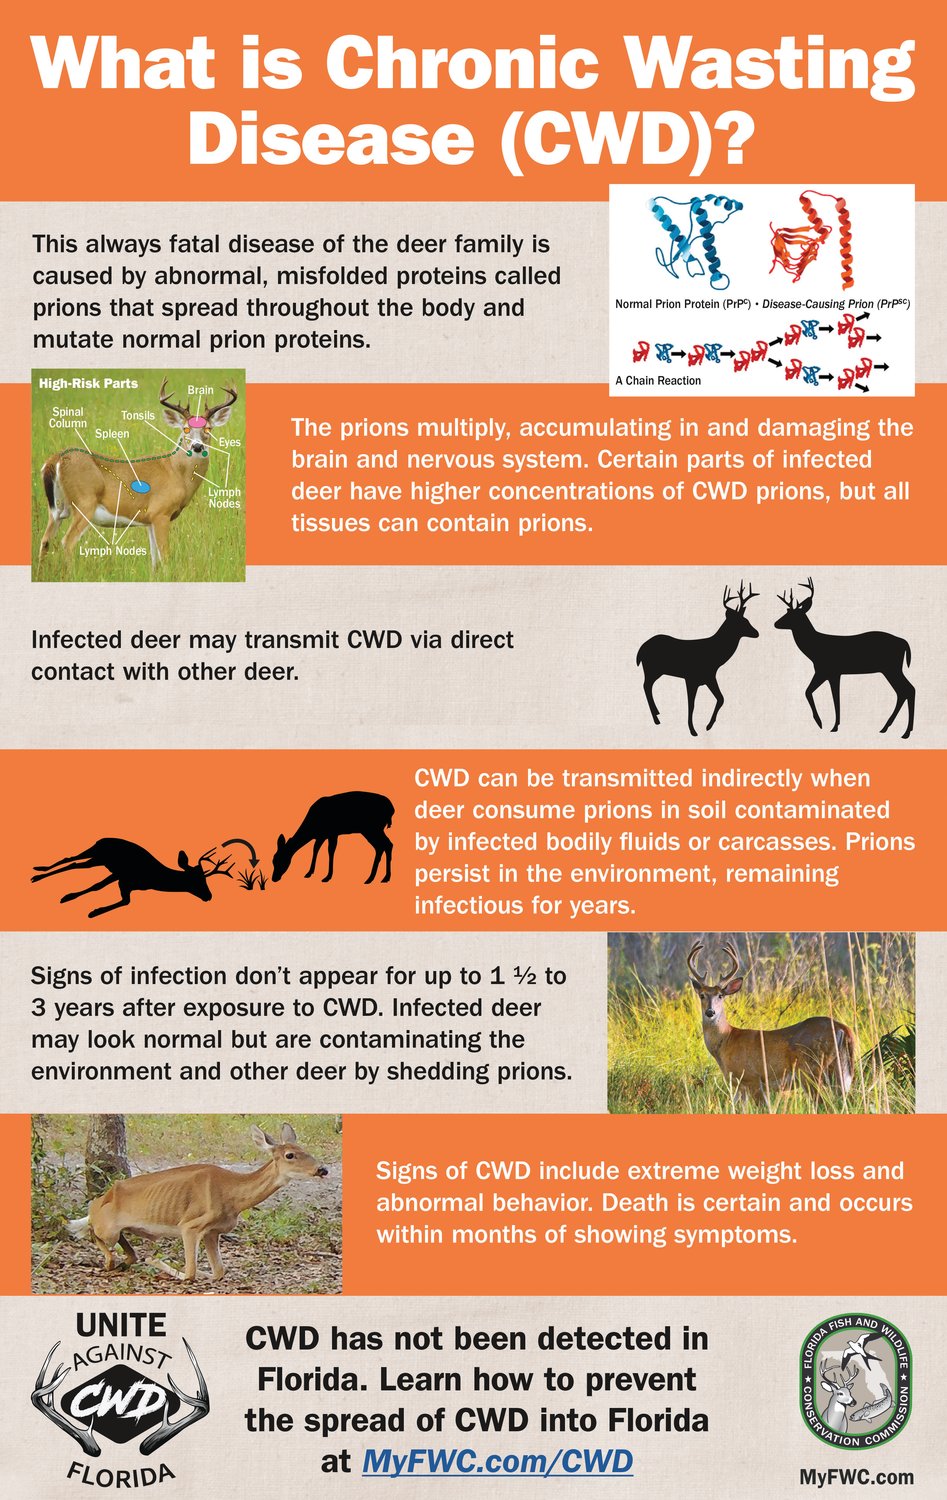 Information about chronic wasting disease